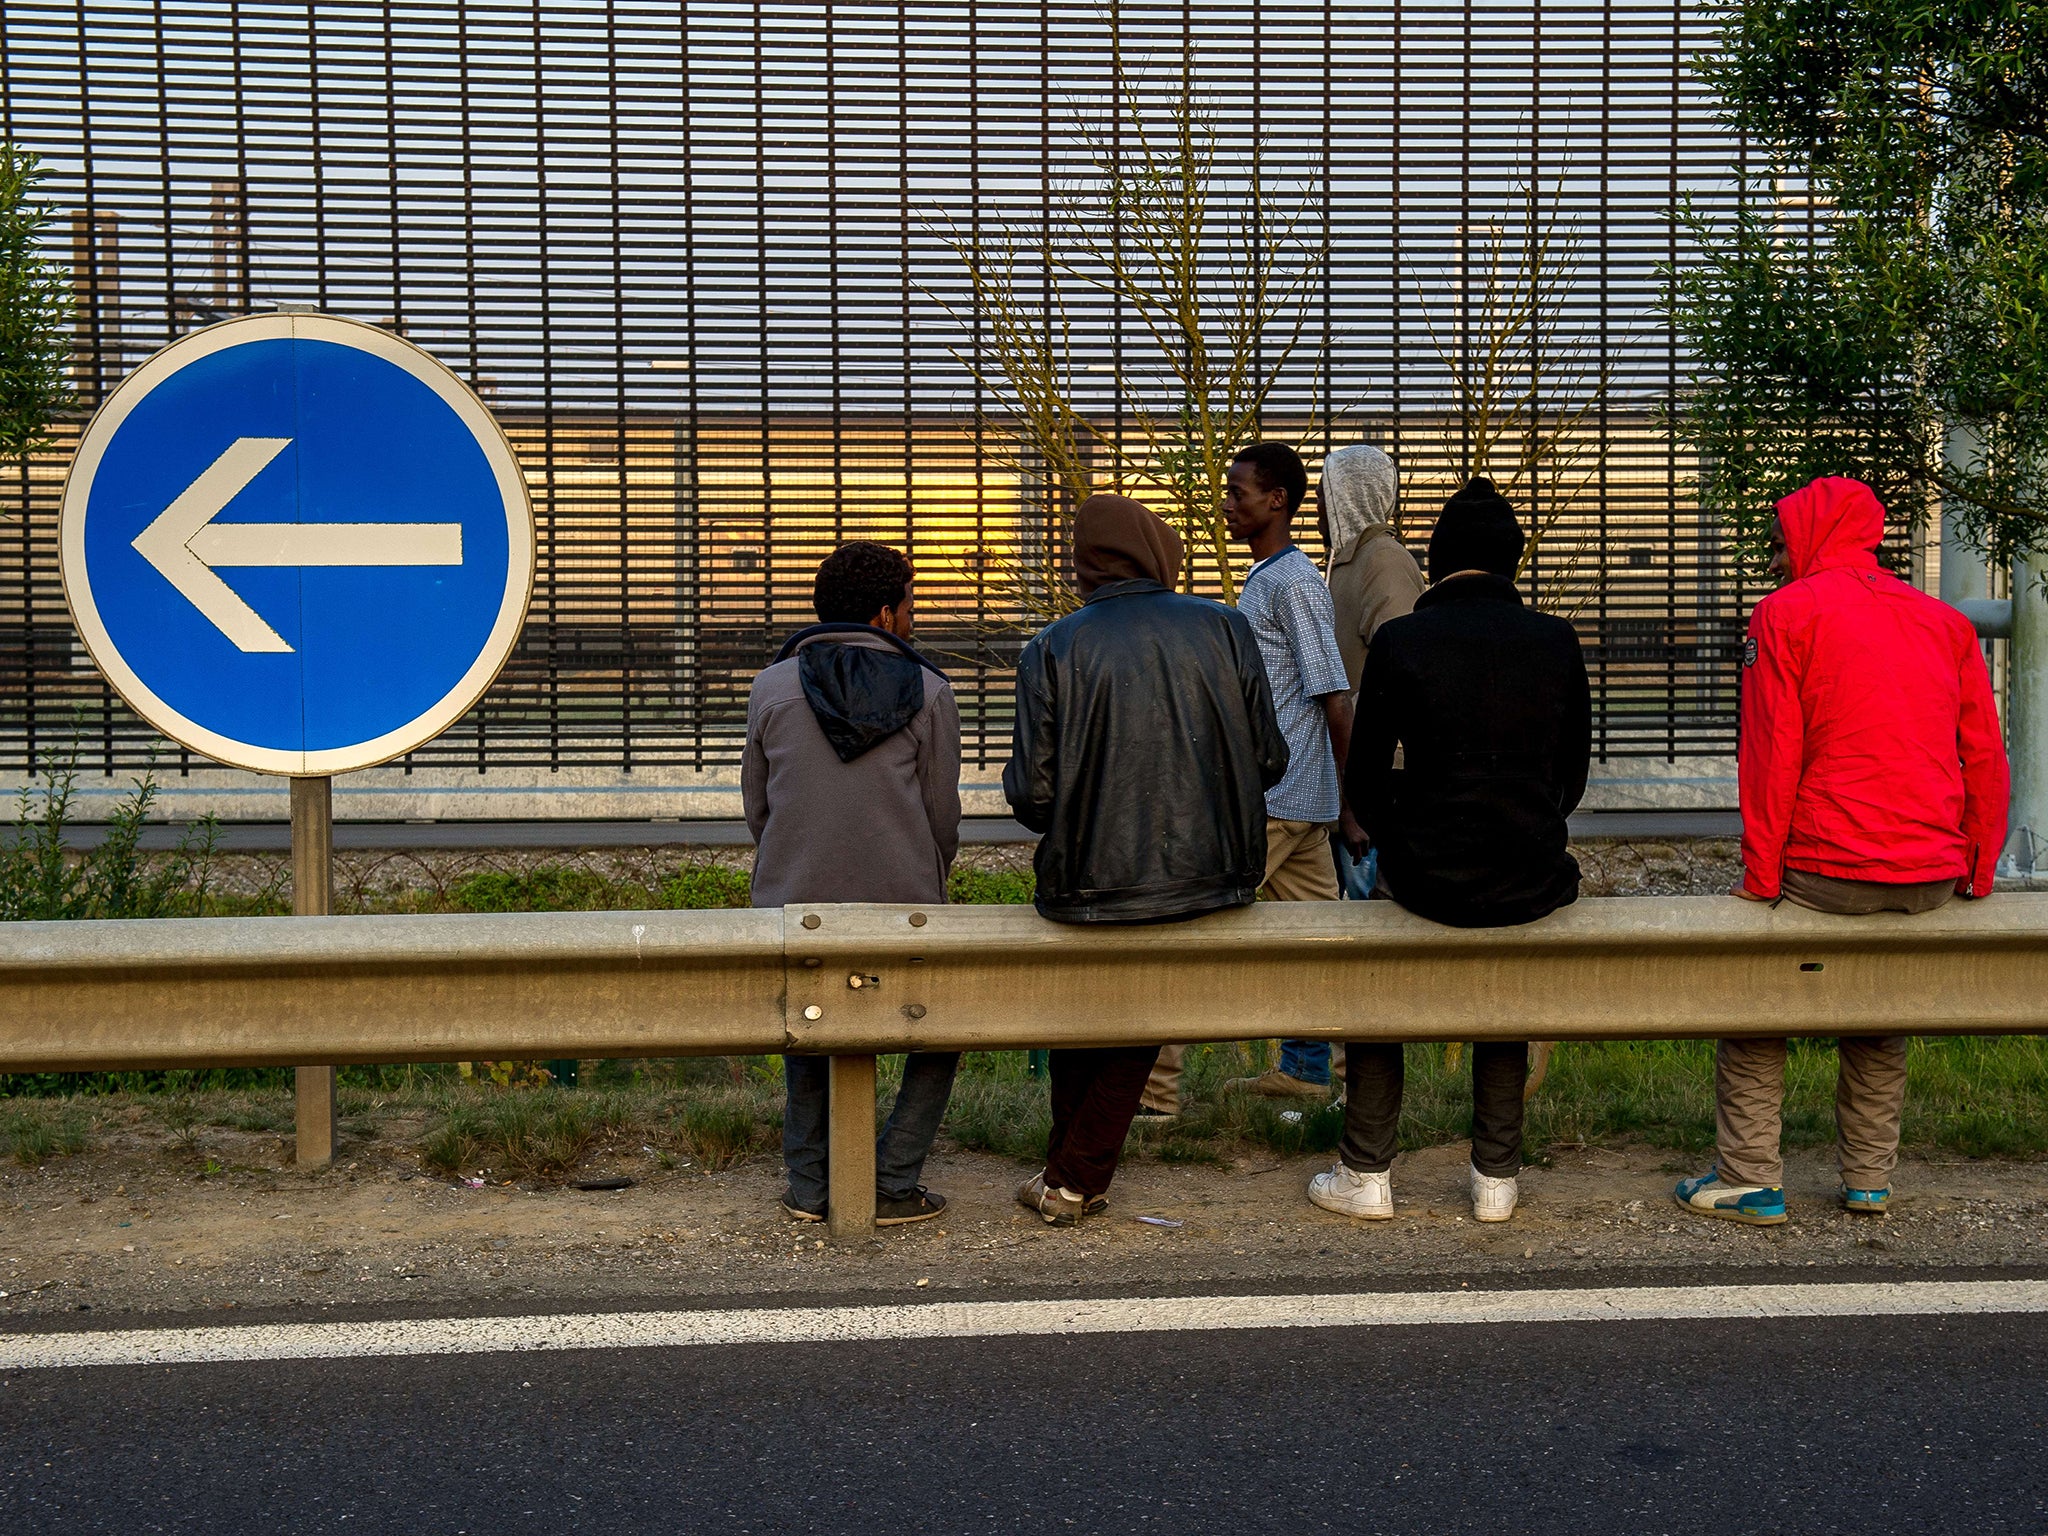 French politicians have called for a renegotiation of the 2003 Treaty of Le Touquet, which moved the British border from the Kent coast to Calais